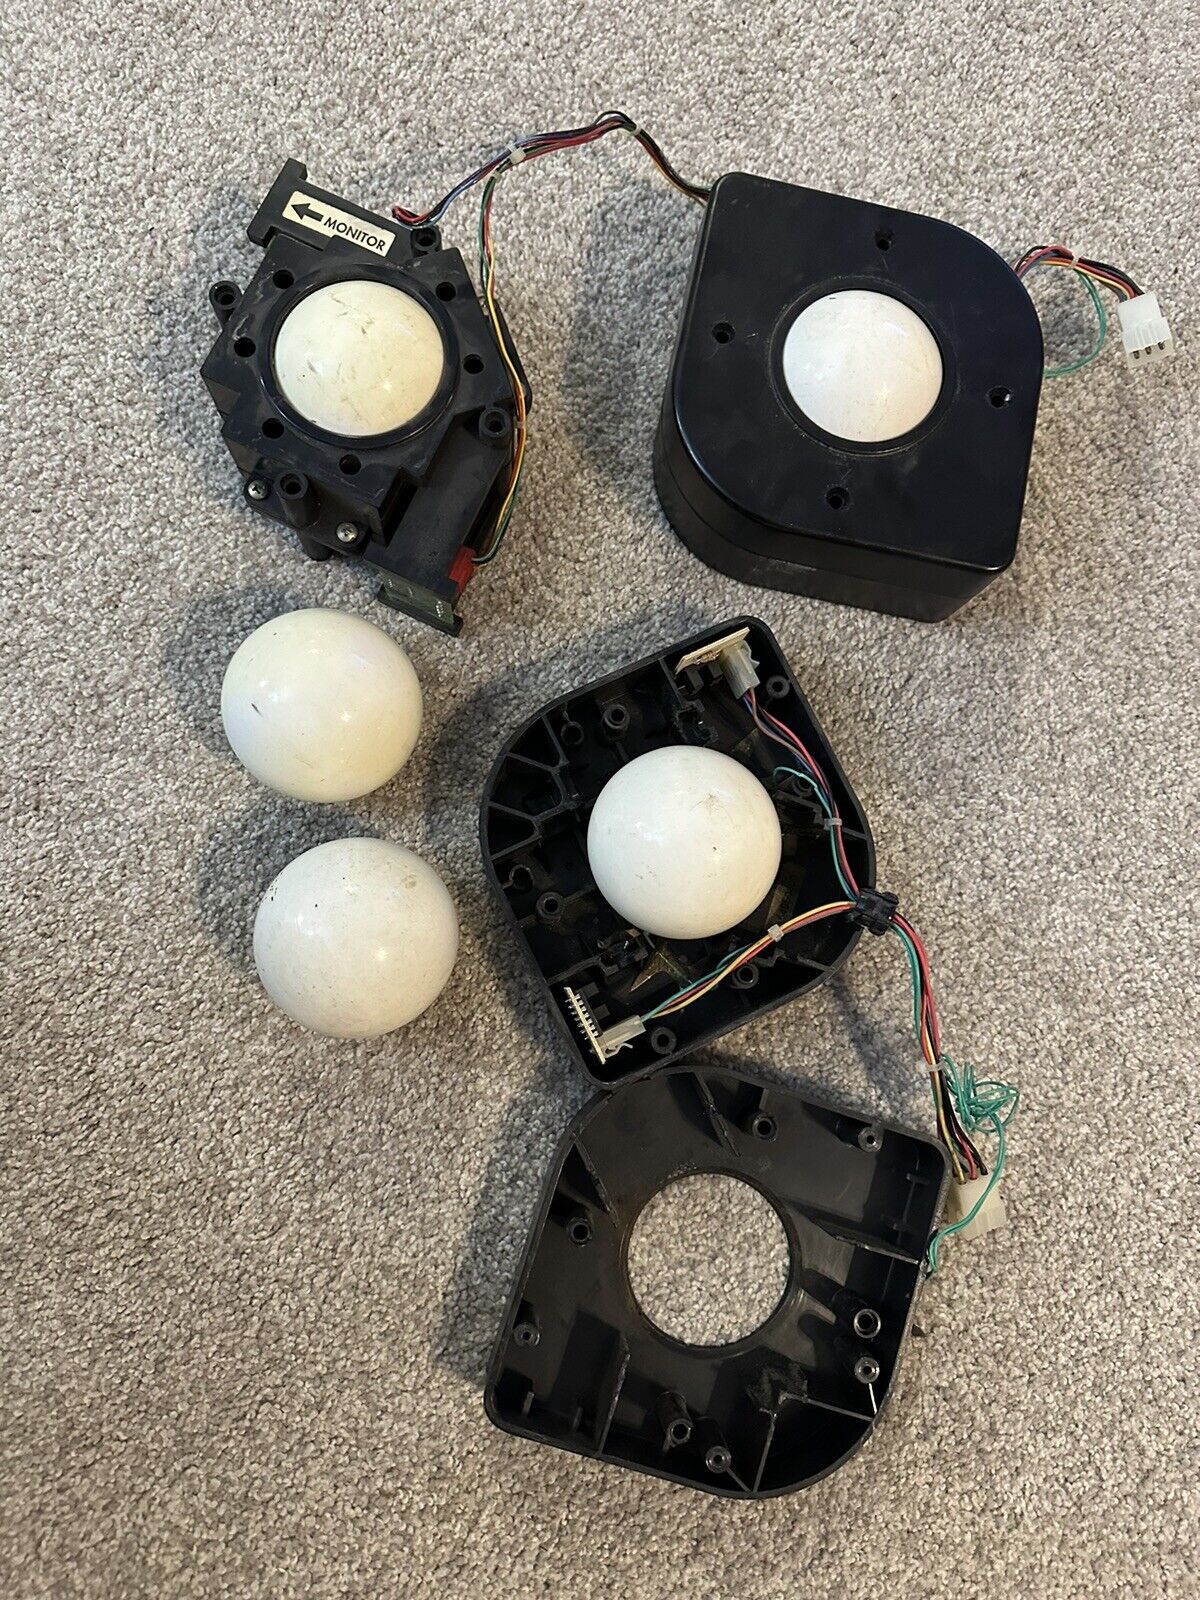 LOT Of 3 - 3” Trackball Controllers 1 Happ and 2 Imperial  and 2 Extra 3” Balls